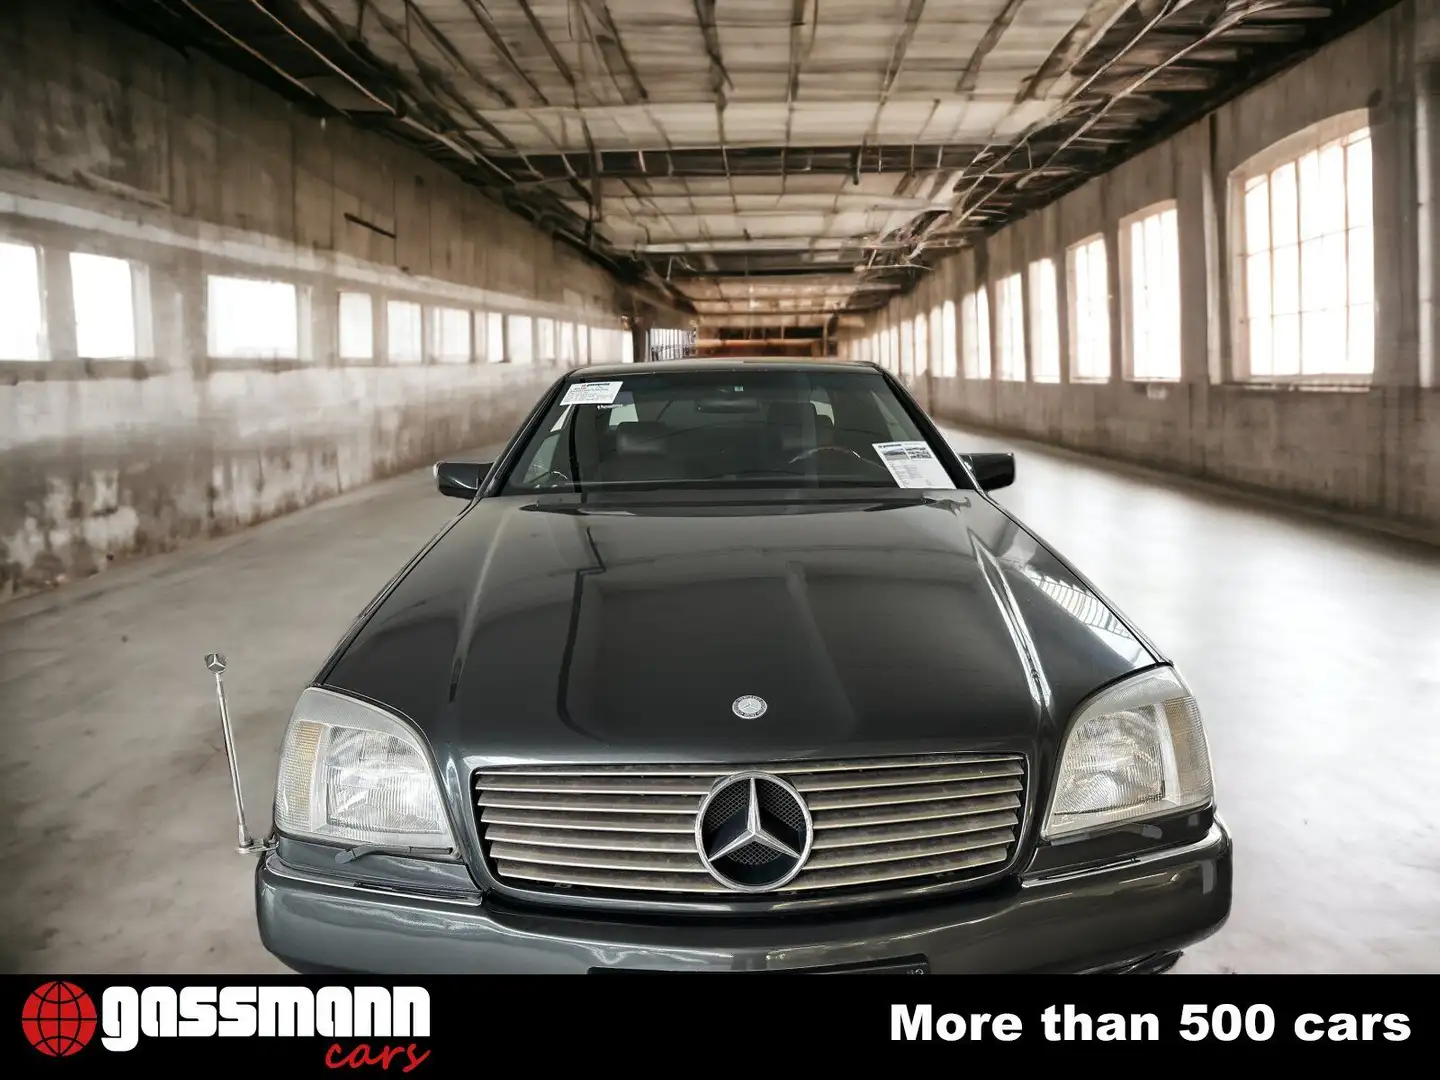 Mercedes-Benz S 600 Coupe / CL 600 Coupe / 600 SEC C140 Fekete - 2